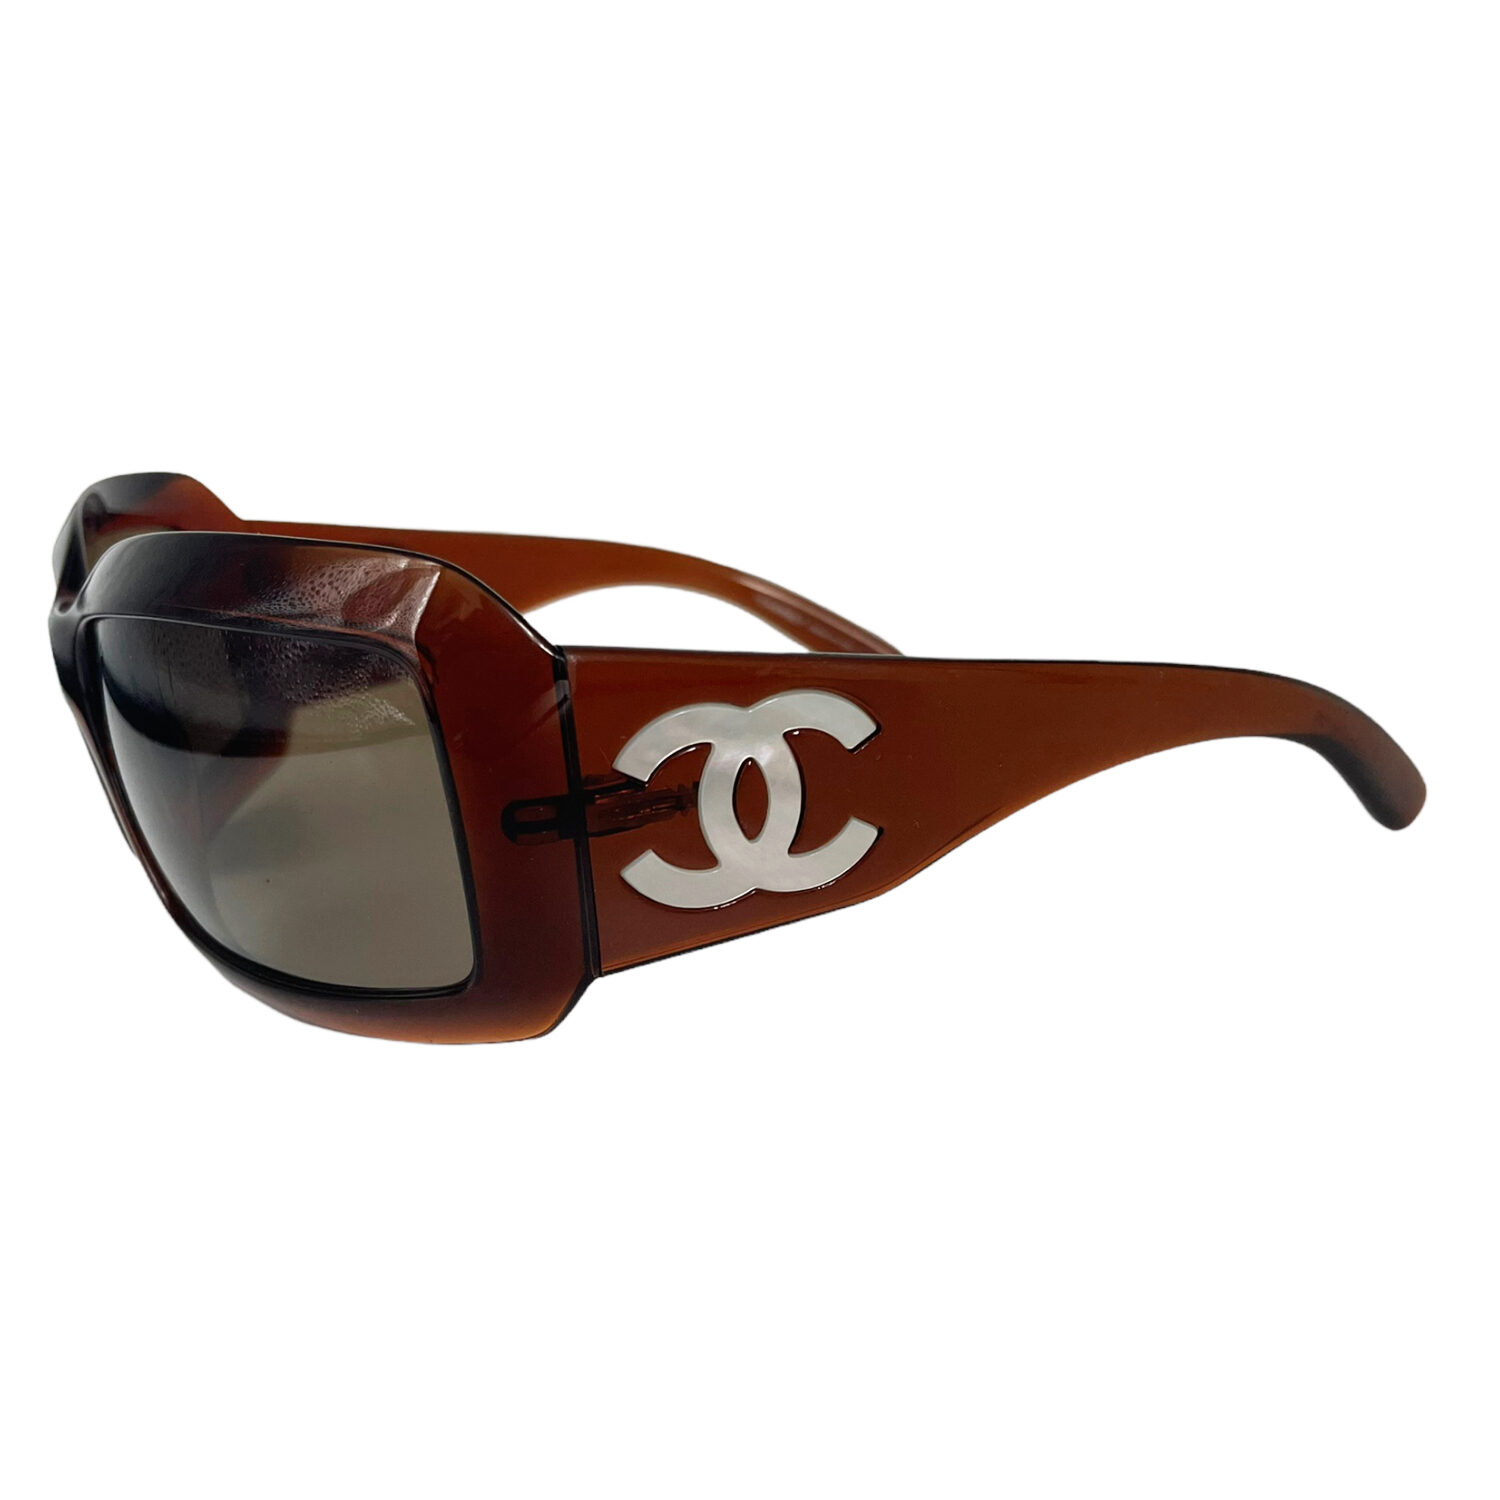 Vintage Chanel Chunky Pearl Sunglasses in Brown | NITRYL